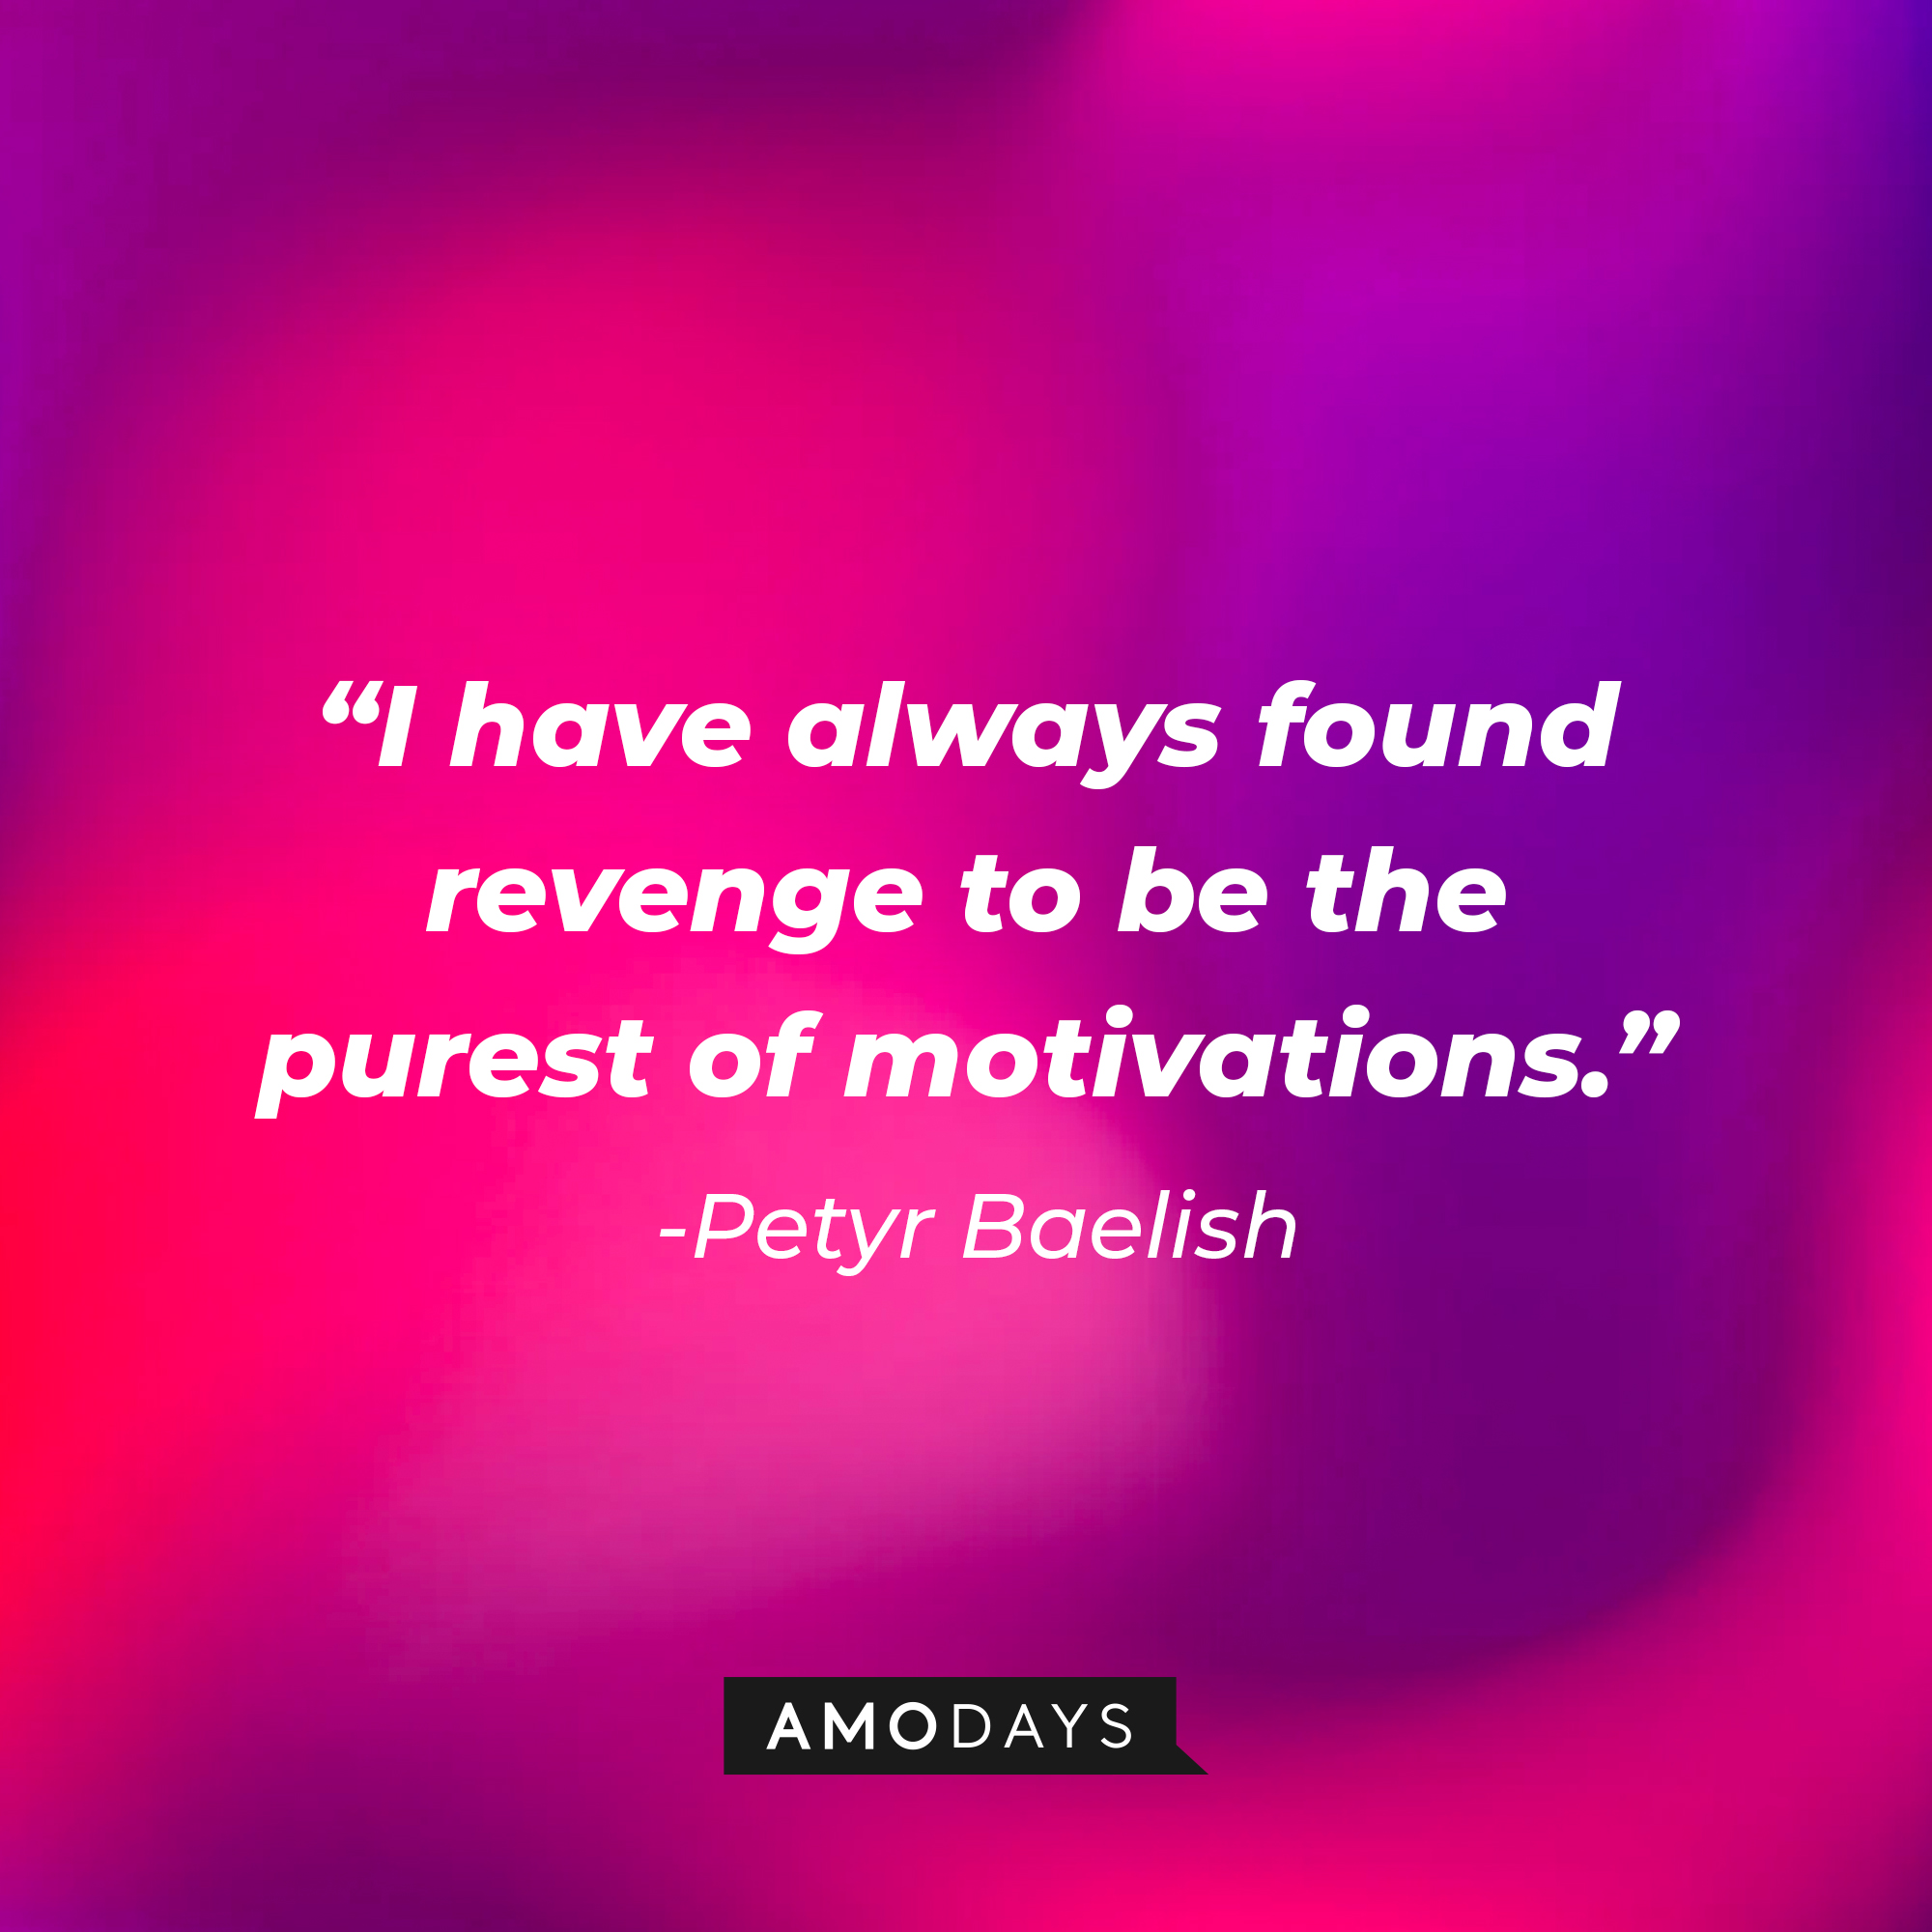 Petyr Baelish’s quote: “I have always found revenge to be the purest of motivations.” | Source: AmoDays